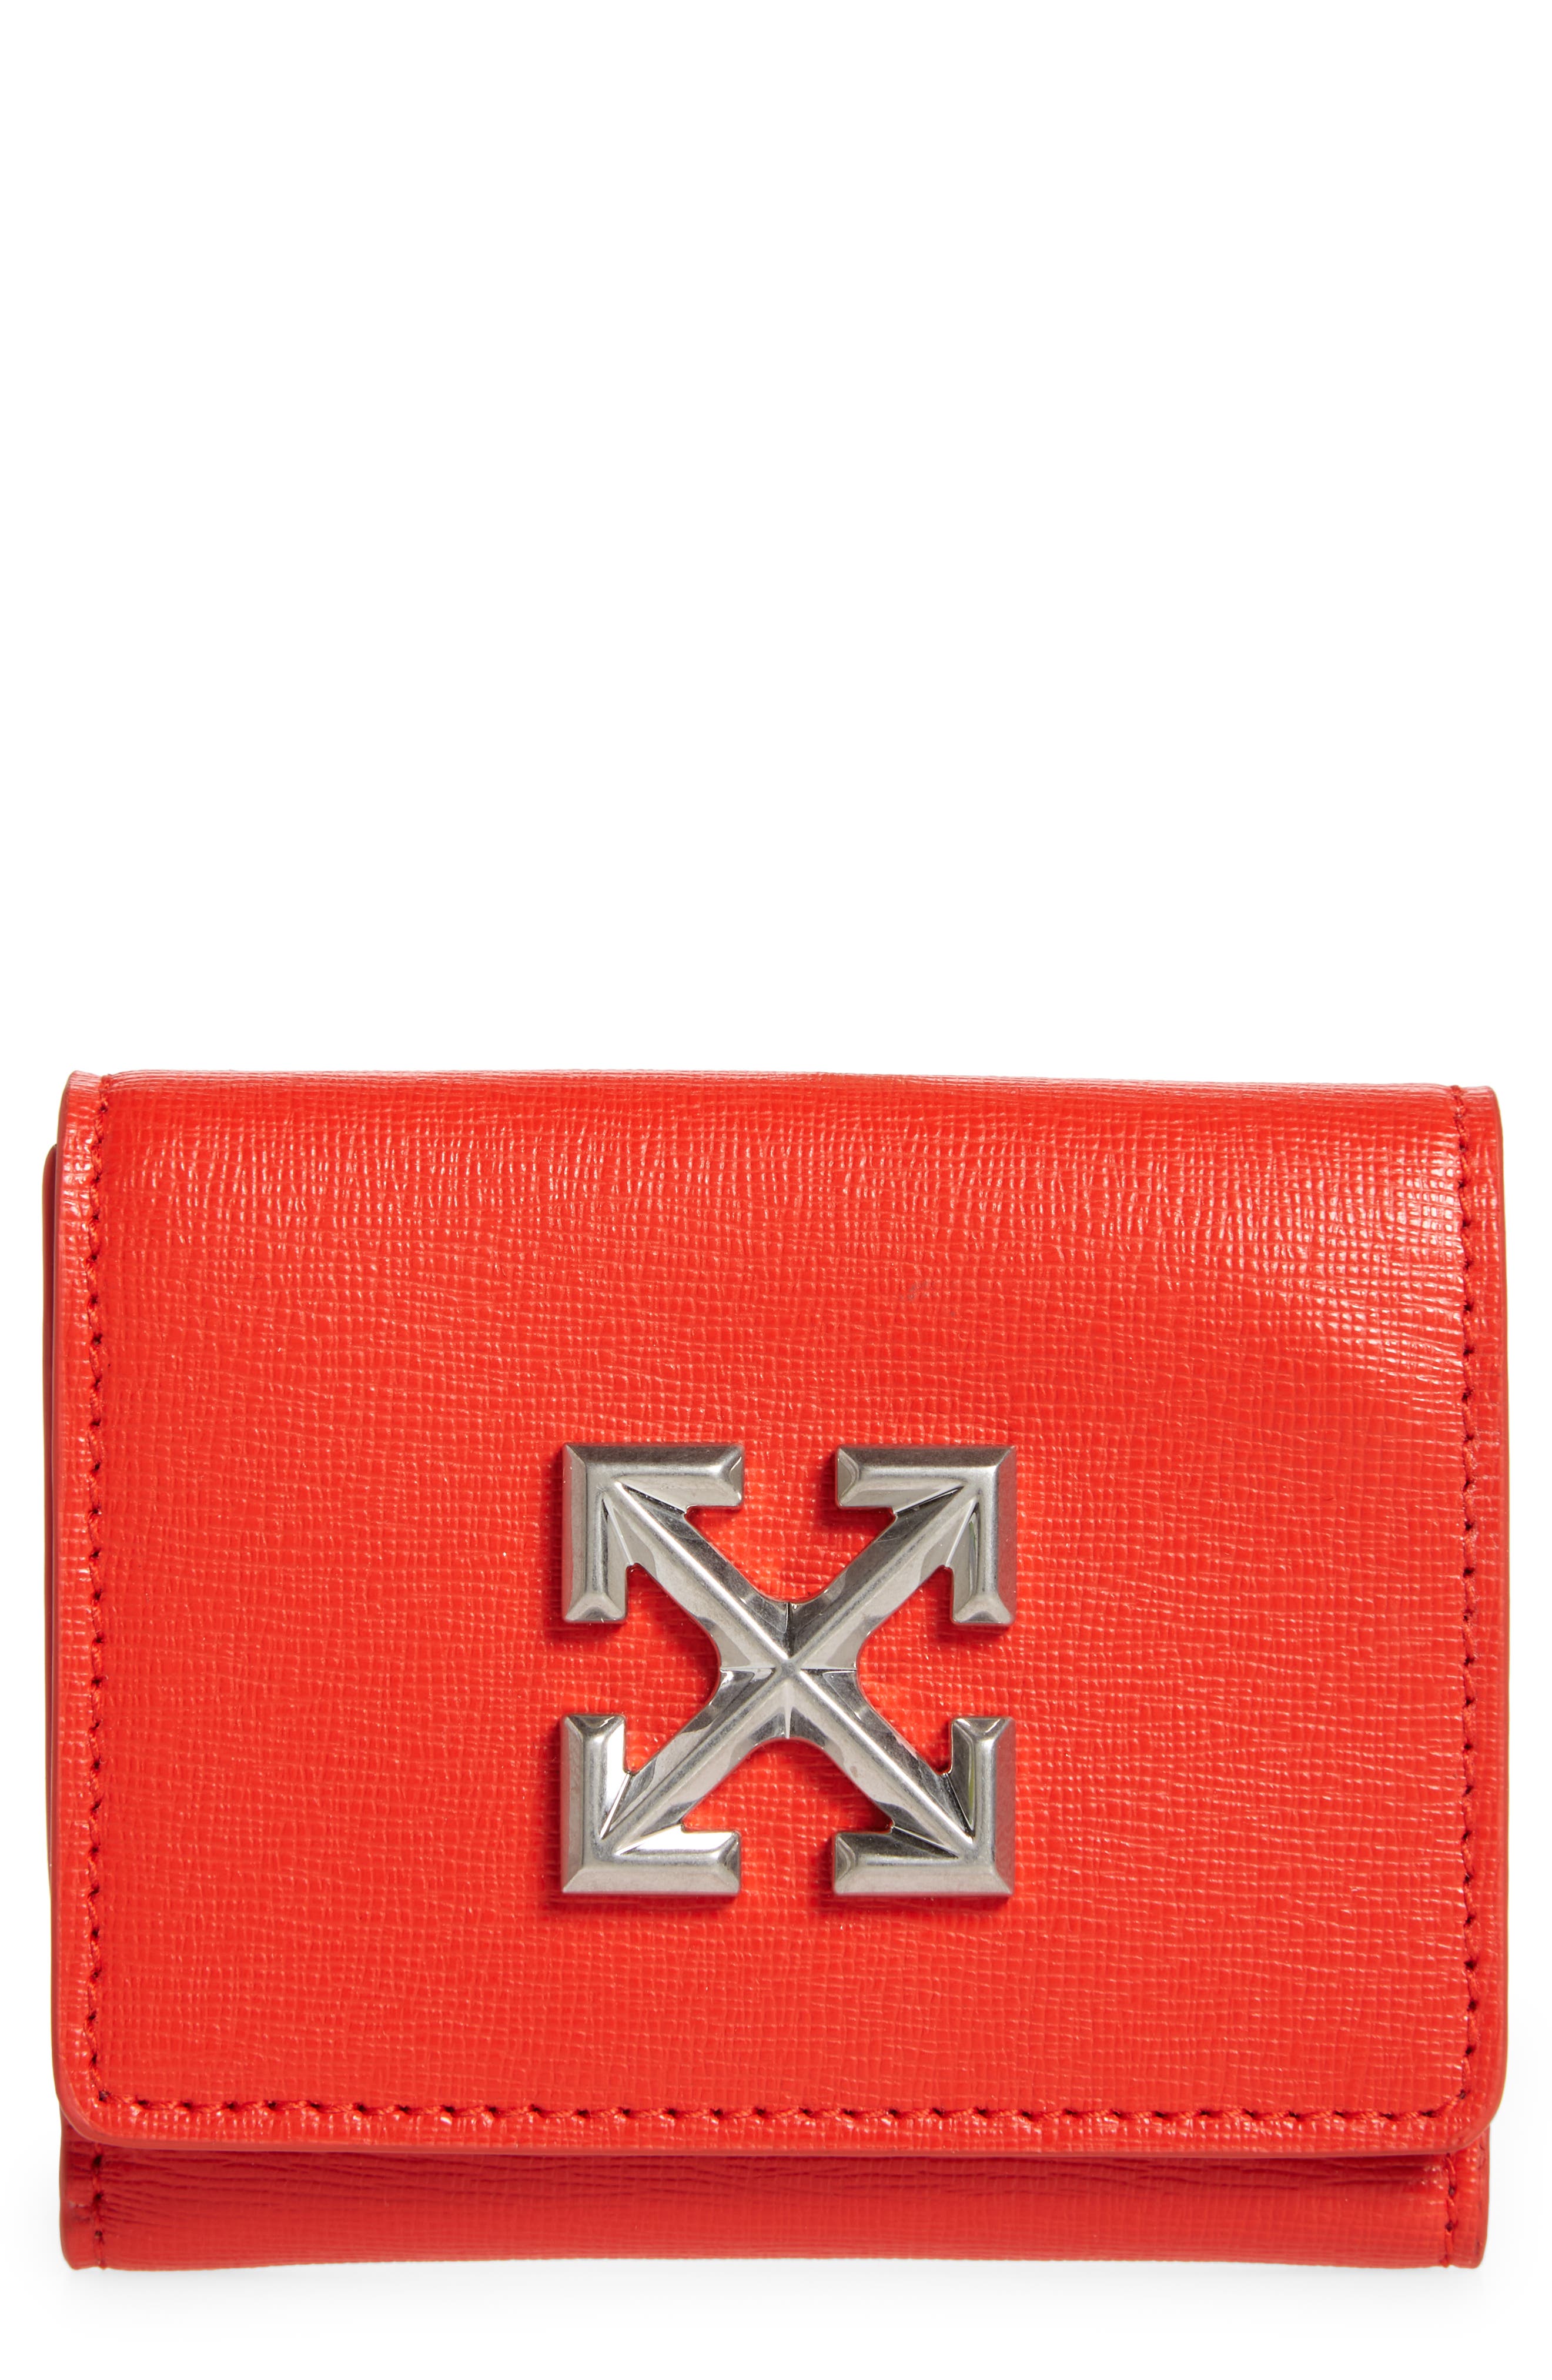 Jitney french leather flap wallet - Off-White - Women